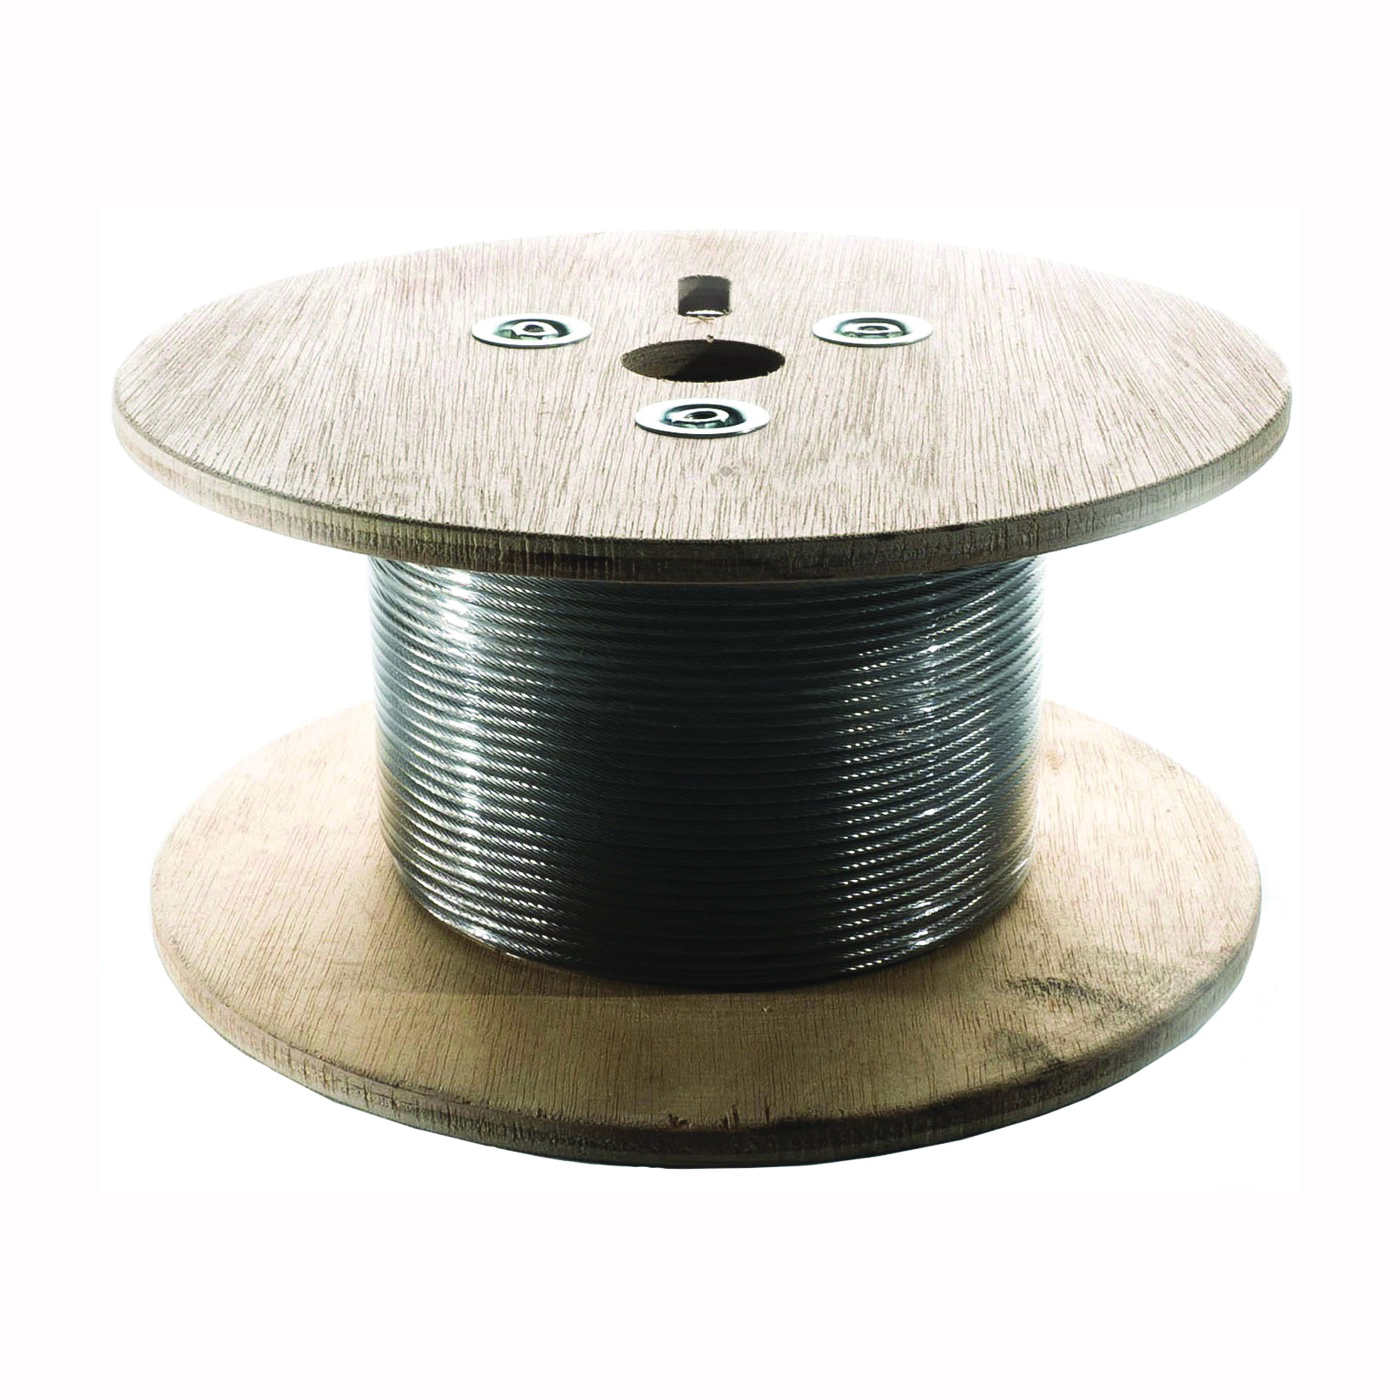 RT WR 3-500 Wire Rope, 3 mm Dia, 500 ft L, 316 Stainless Steel